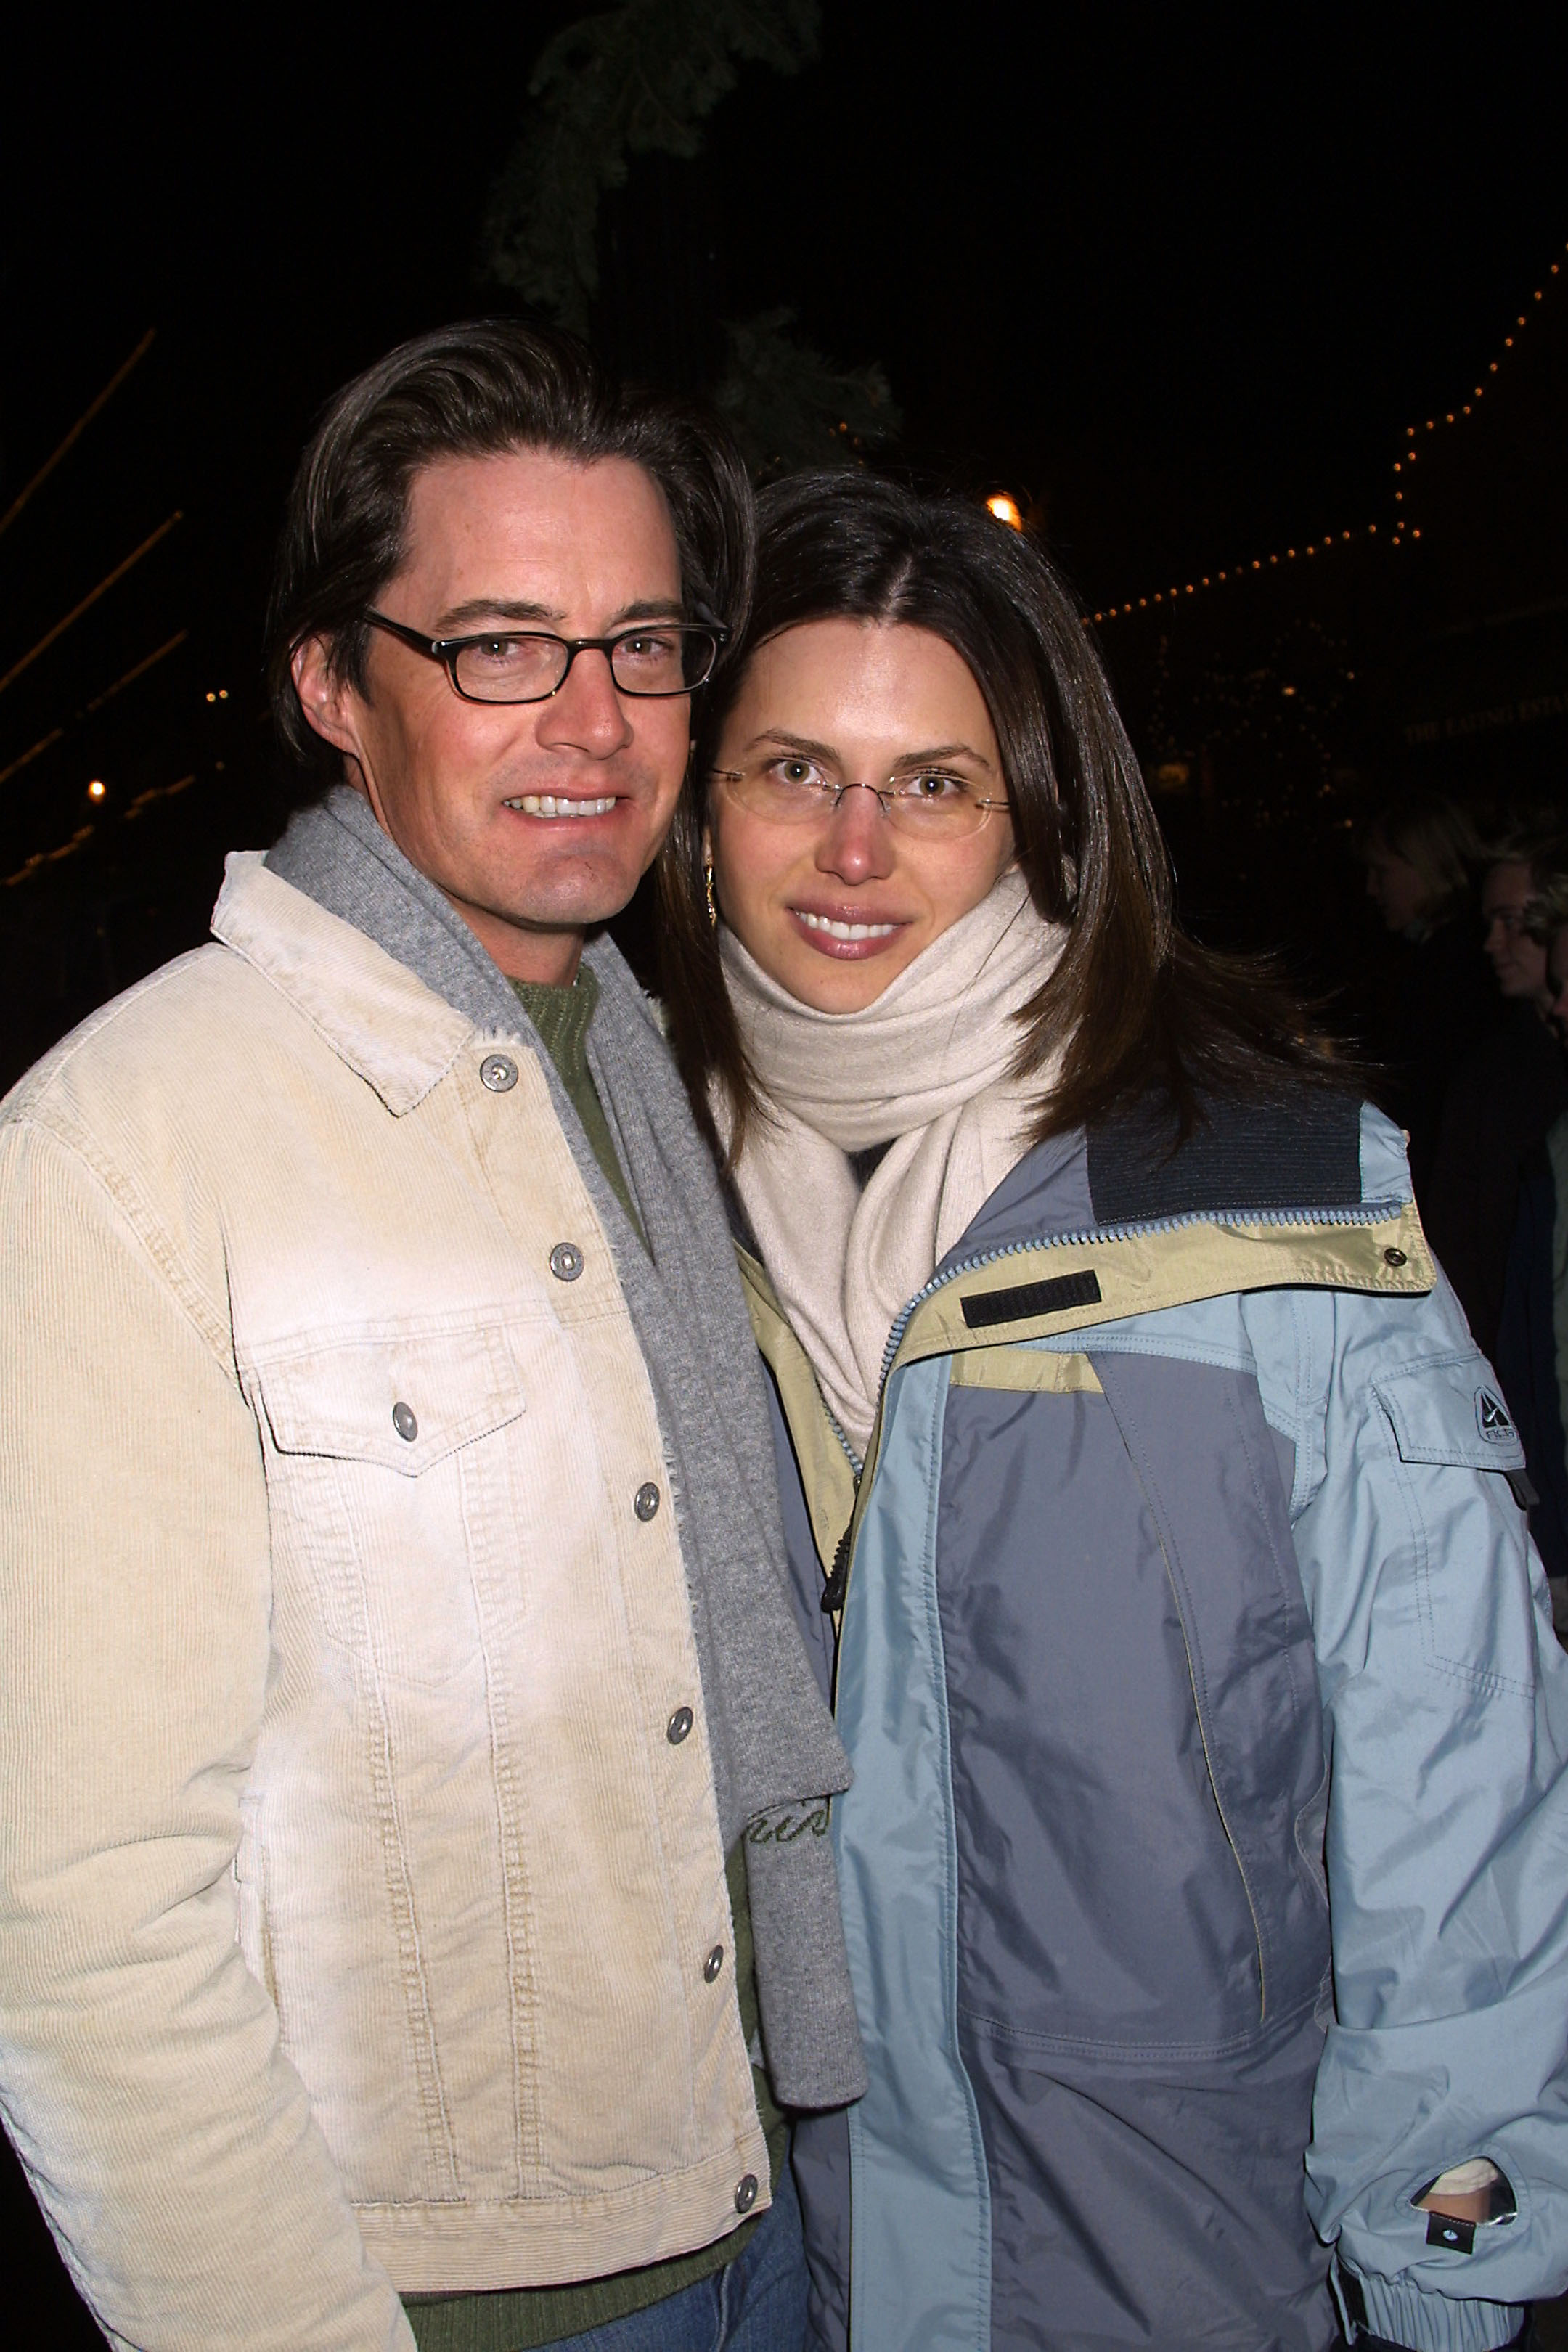 Kyle MacLachlan and Desiree Gruber at the premiere "Miranda" during the 2002 Sundance Film Festival in Park City, Utah. | Source: Getty Images